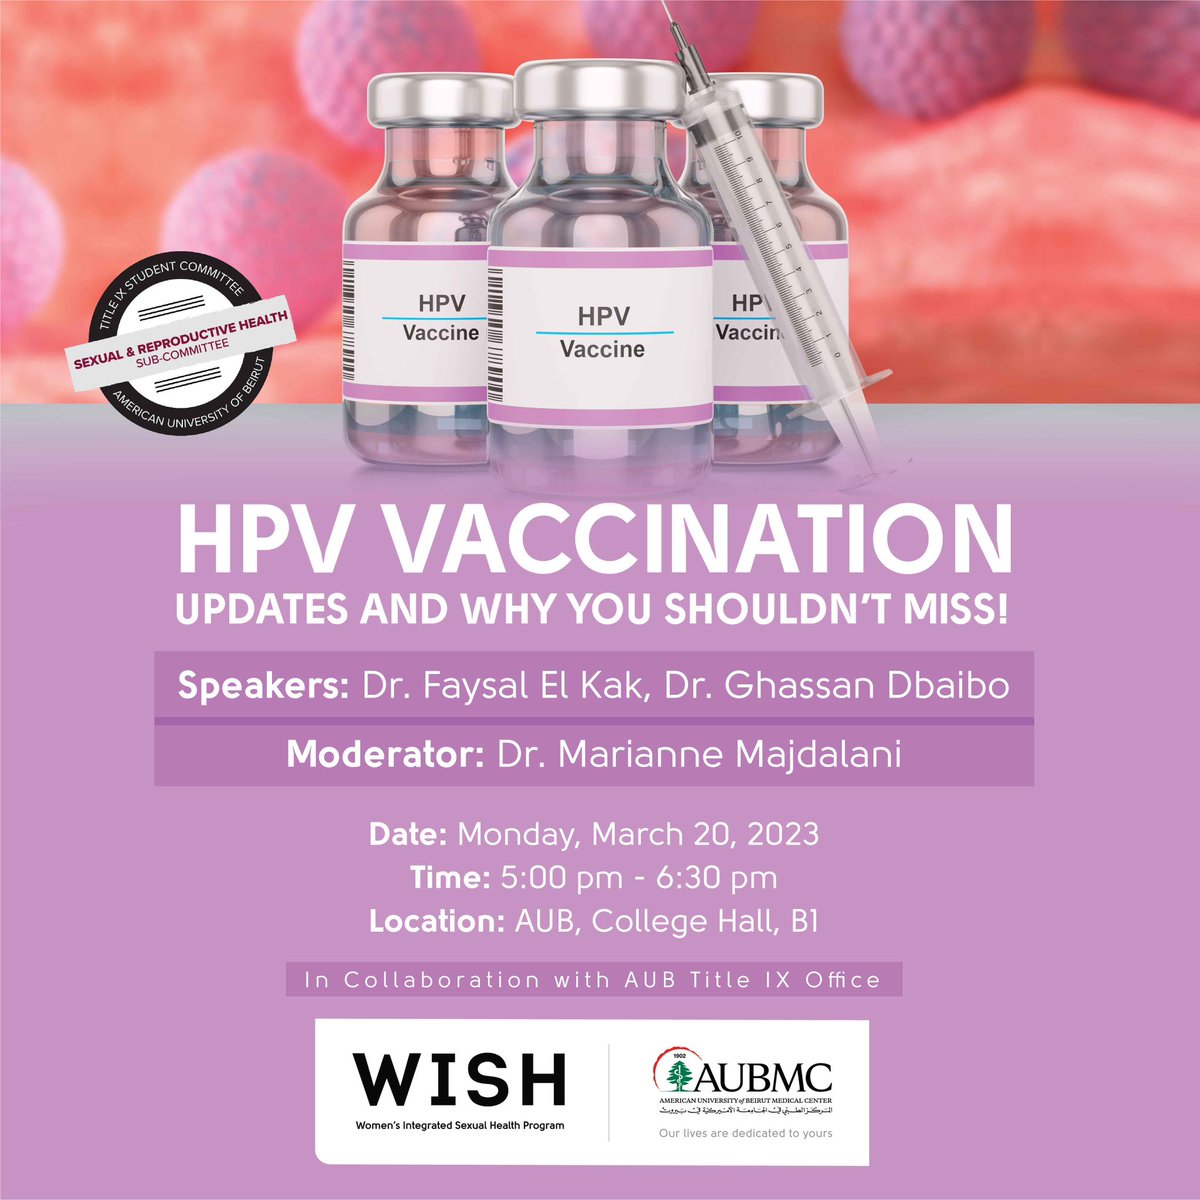 All you need to know about #HPV infection #transmission #cervicalcancer and the role of #HPVvaccine in eliminating risks #Prevention #cervicalcancerelimination by @wish_Aubmc  panel @Drelkak @FHS_AUB @AUB_Lebanon